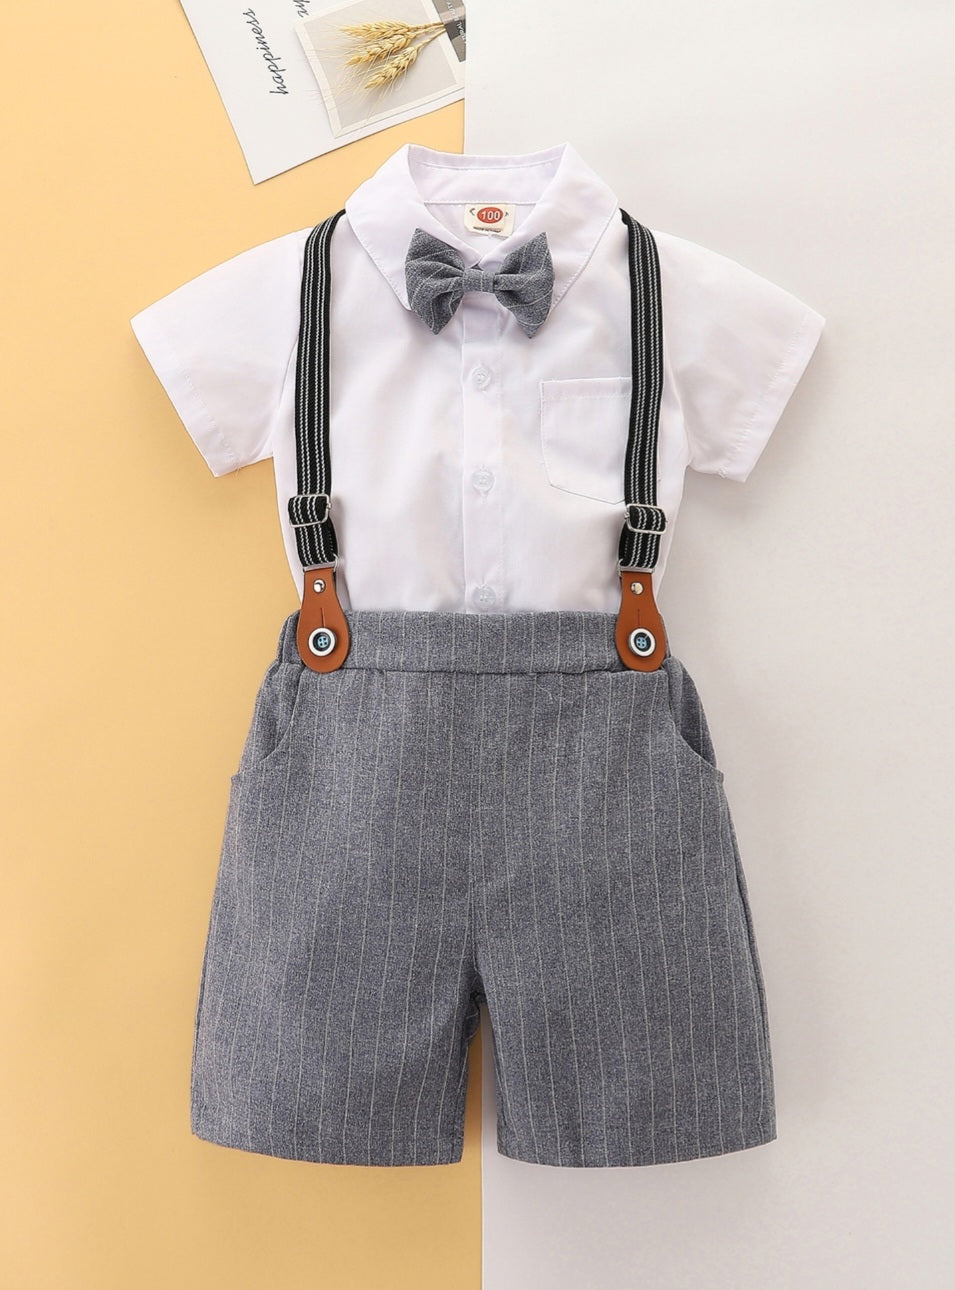 4PSC Gentleman Suit.   (Shirt also available in baby boys with romper)